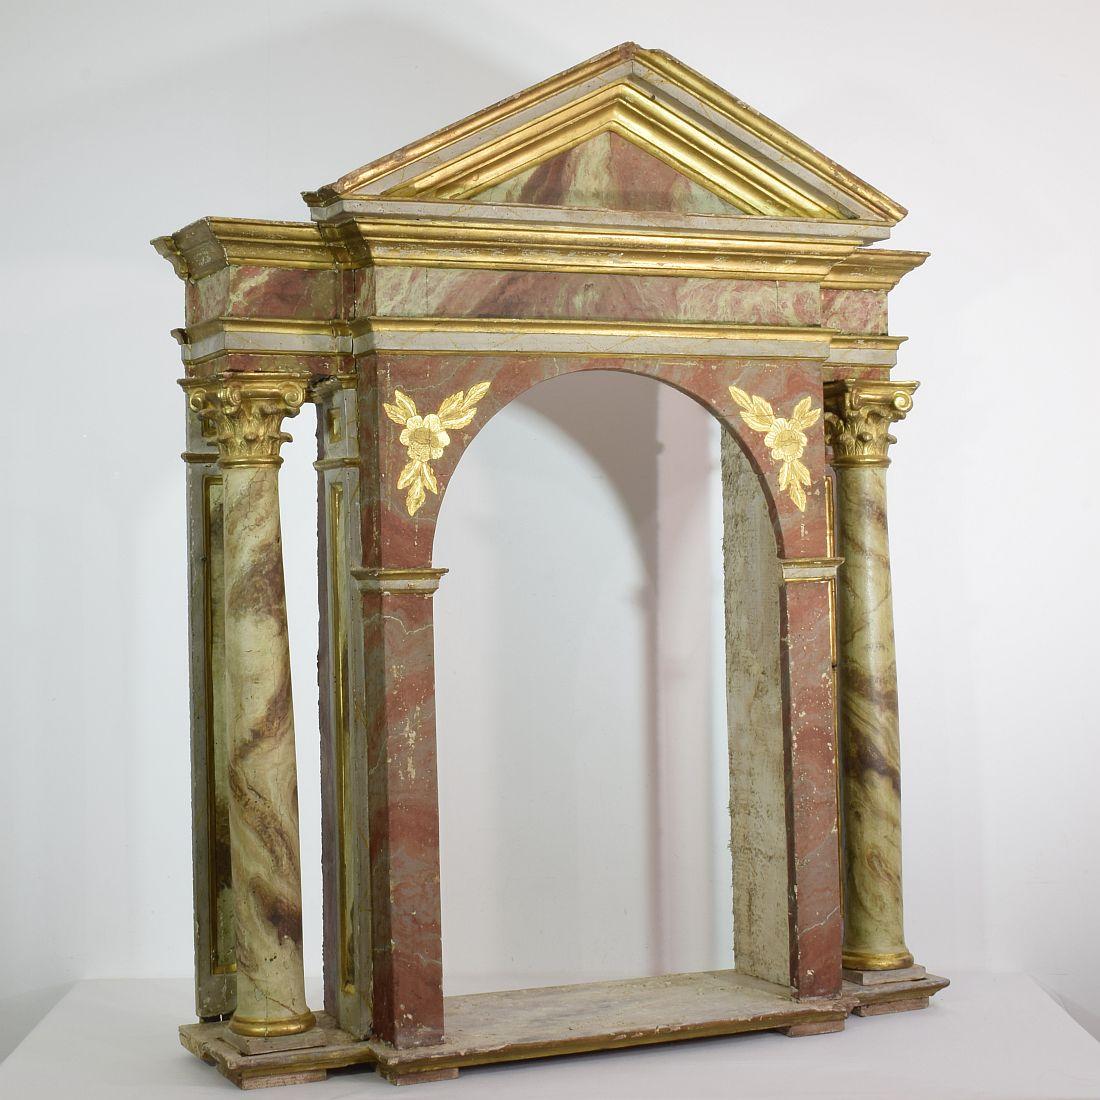 Hand-Crafted Spanish 18th Century Neoclassical Carved Wooden Altar Shrine